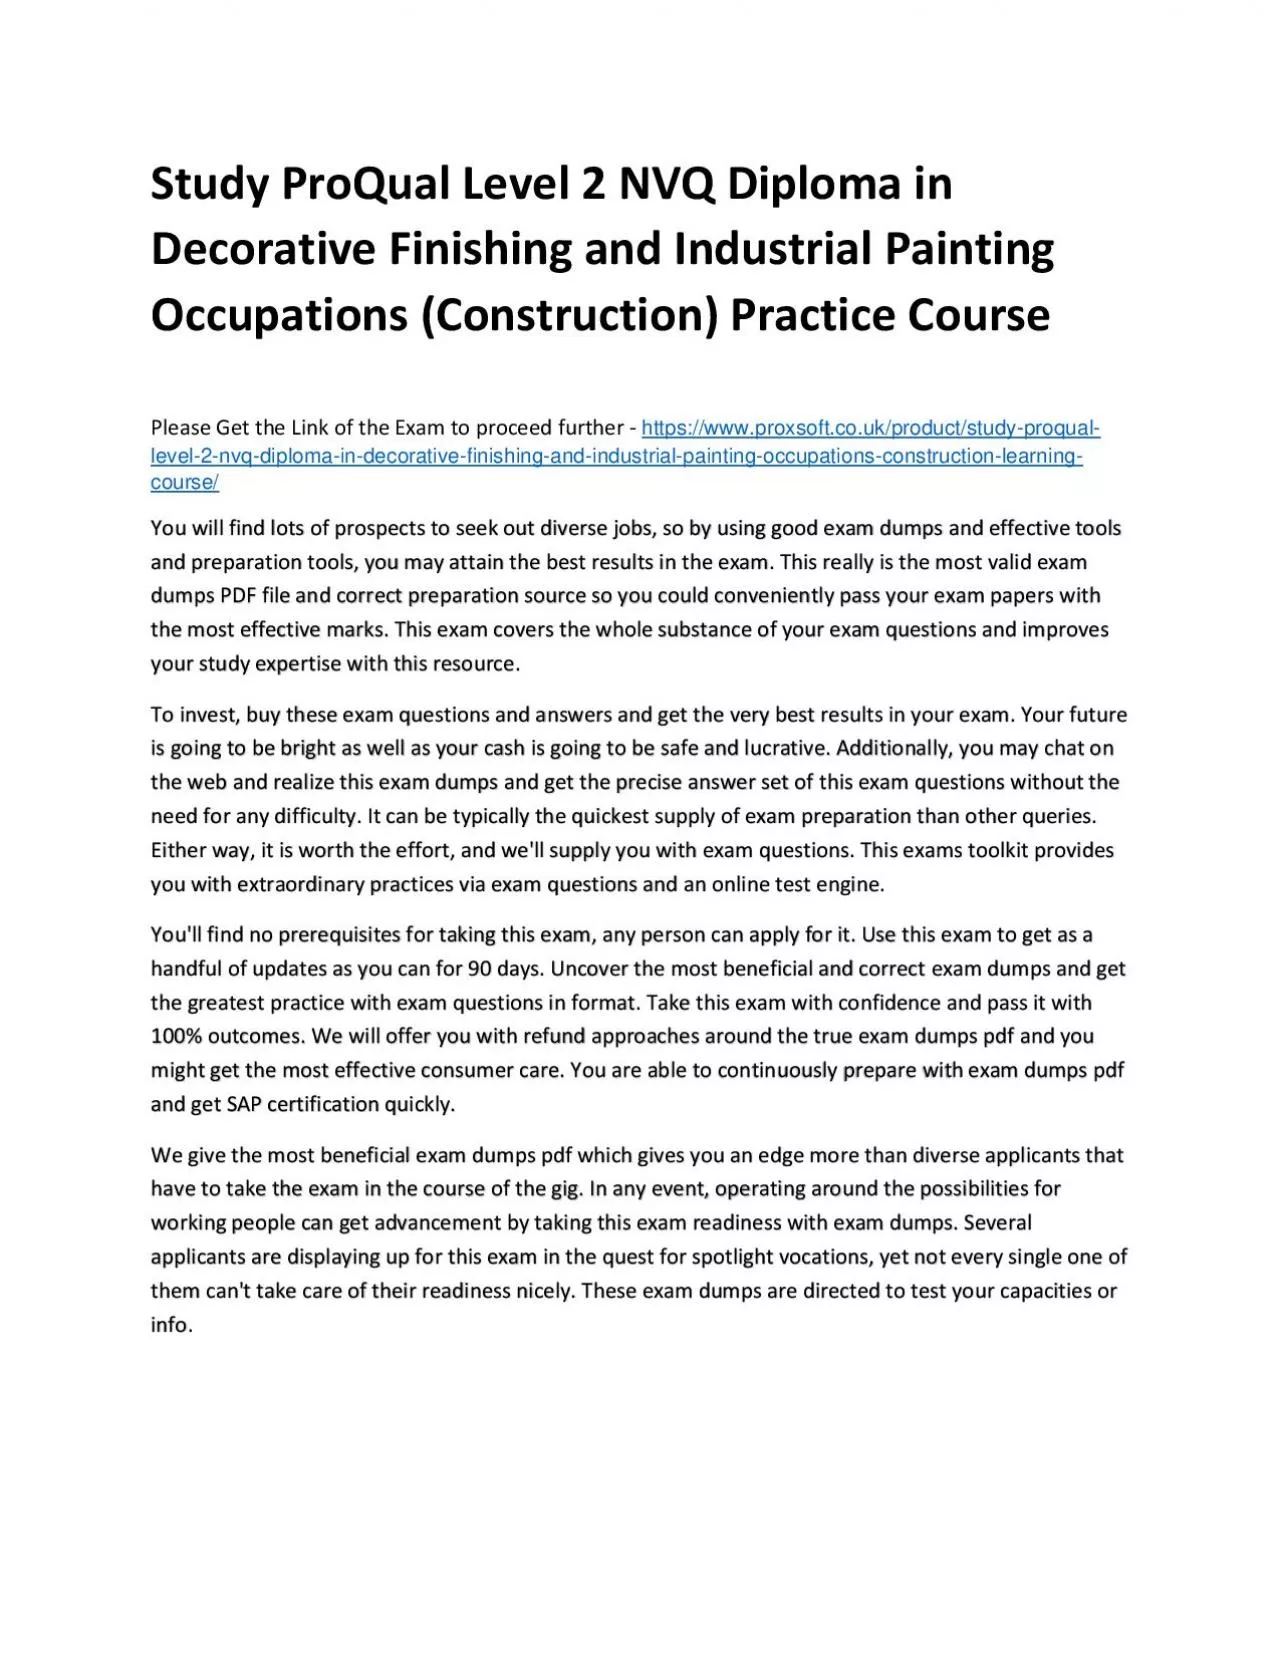 Study ProQual Level 2 NVQ Diploma in Decorative Finishing and Industrial Painting Occupations